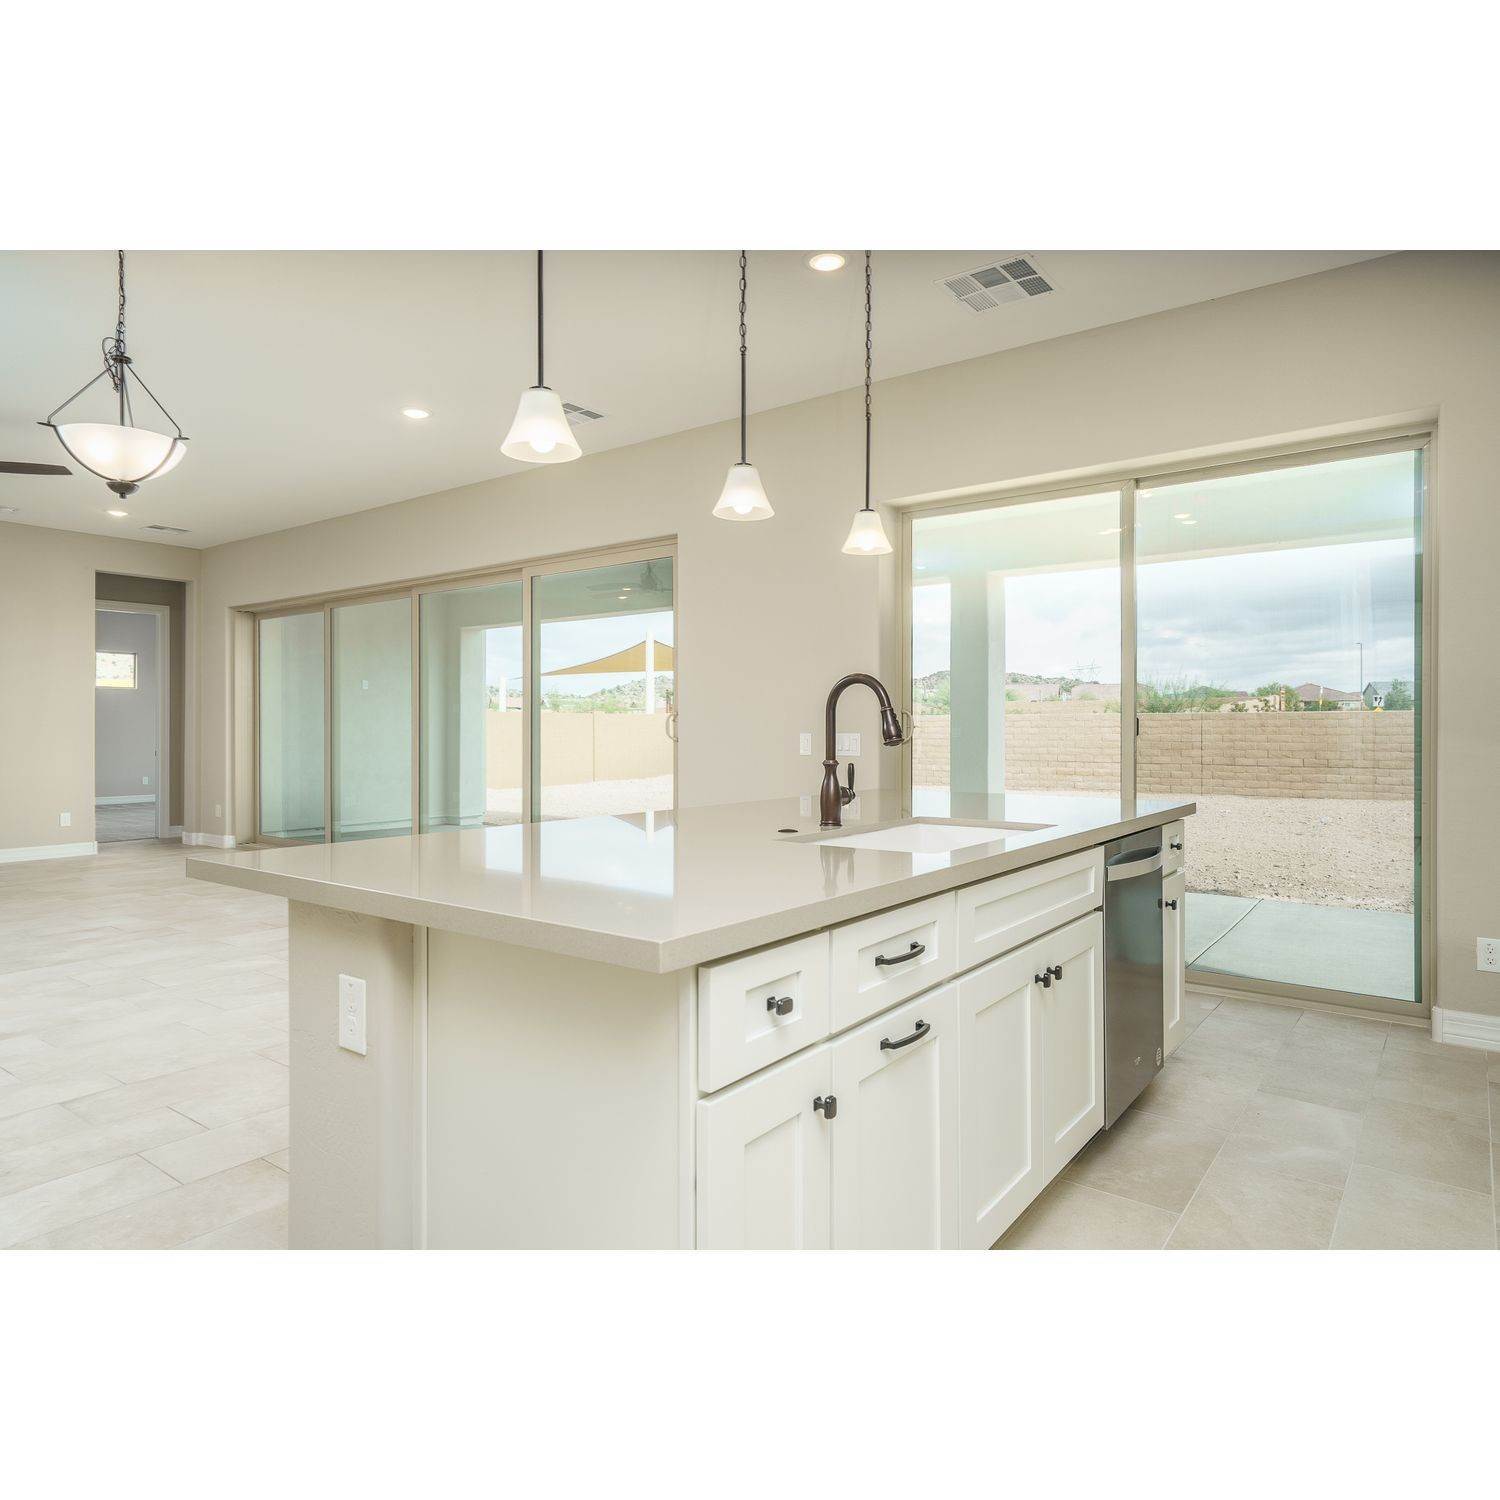 27. Single Family for Sale at Harmony At Montecito In Estrella 18624 W Cathedral Rock Drive, Goodyear, AZ 85338